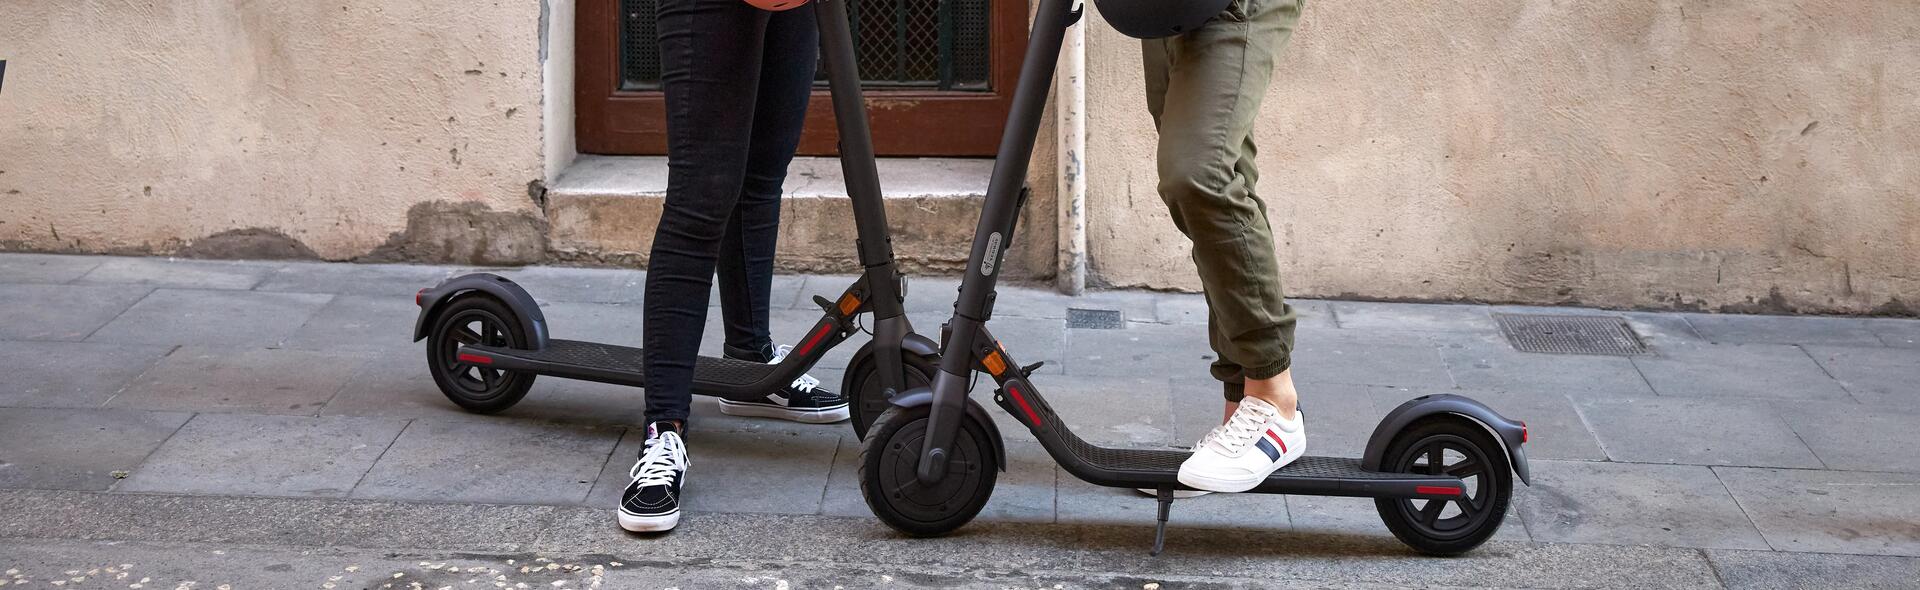 Two people scootering outside